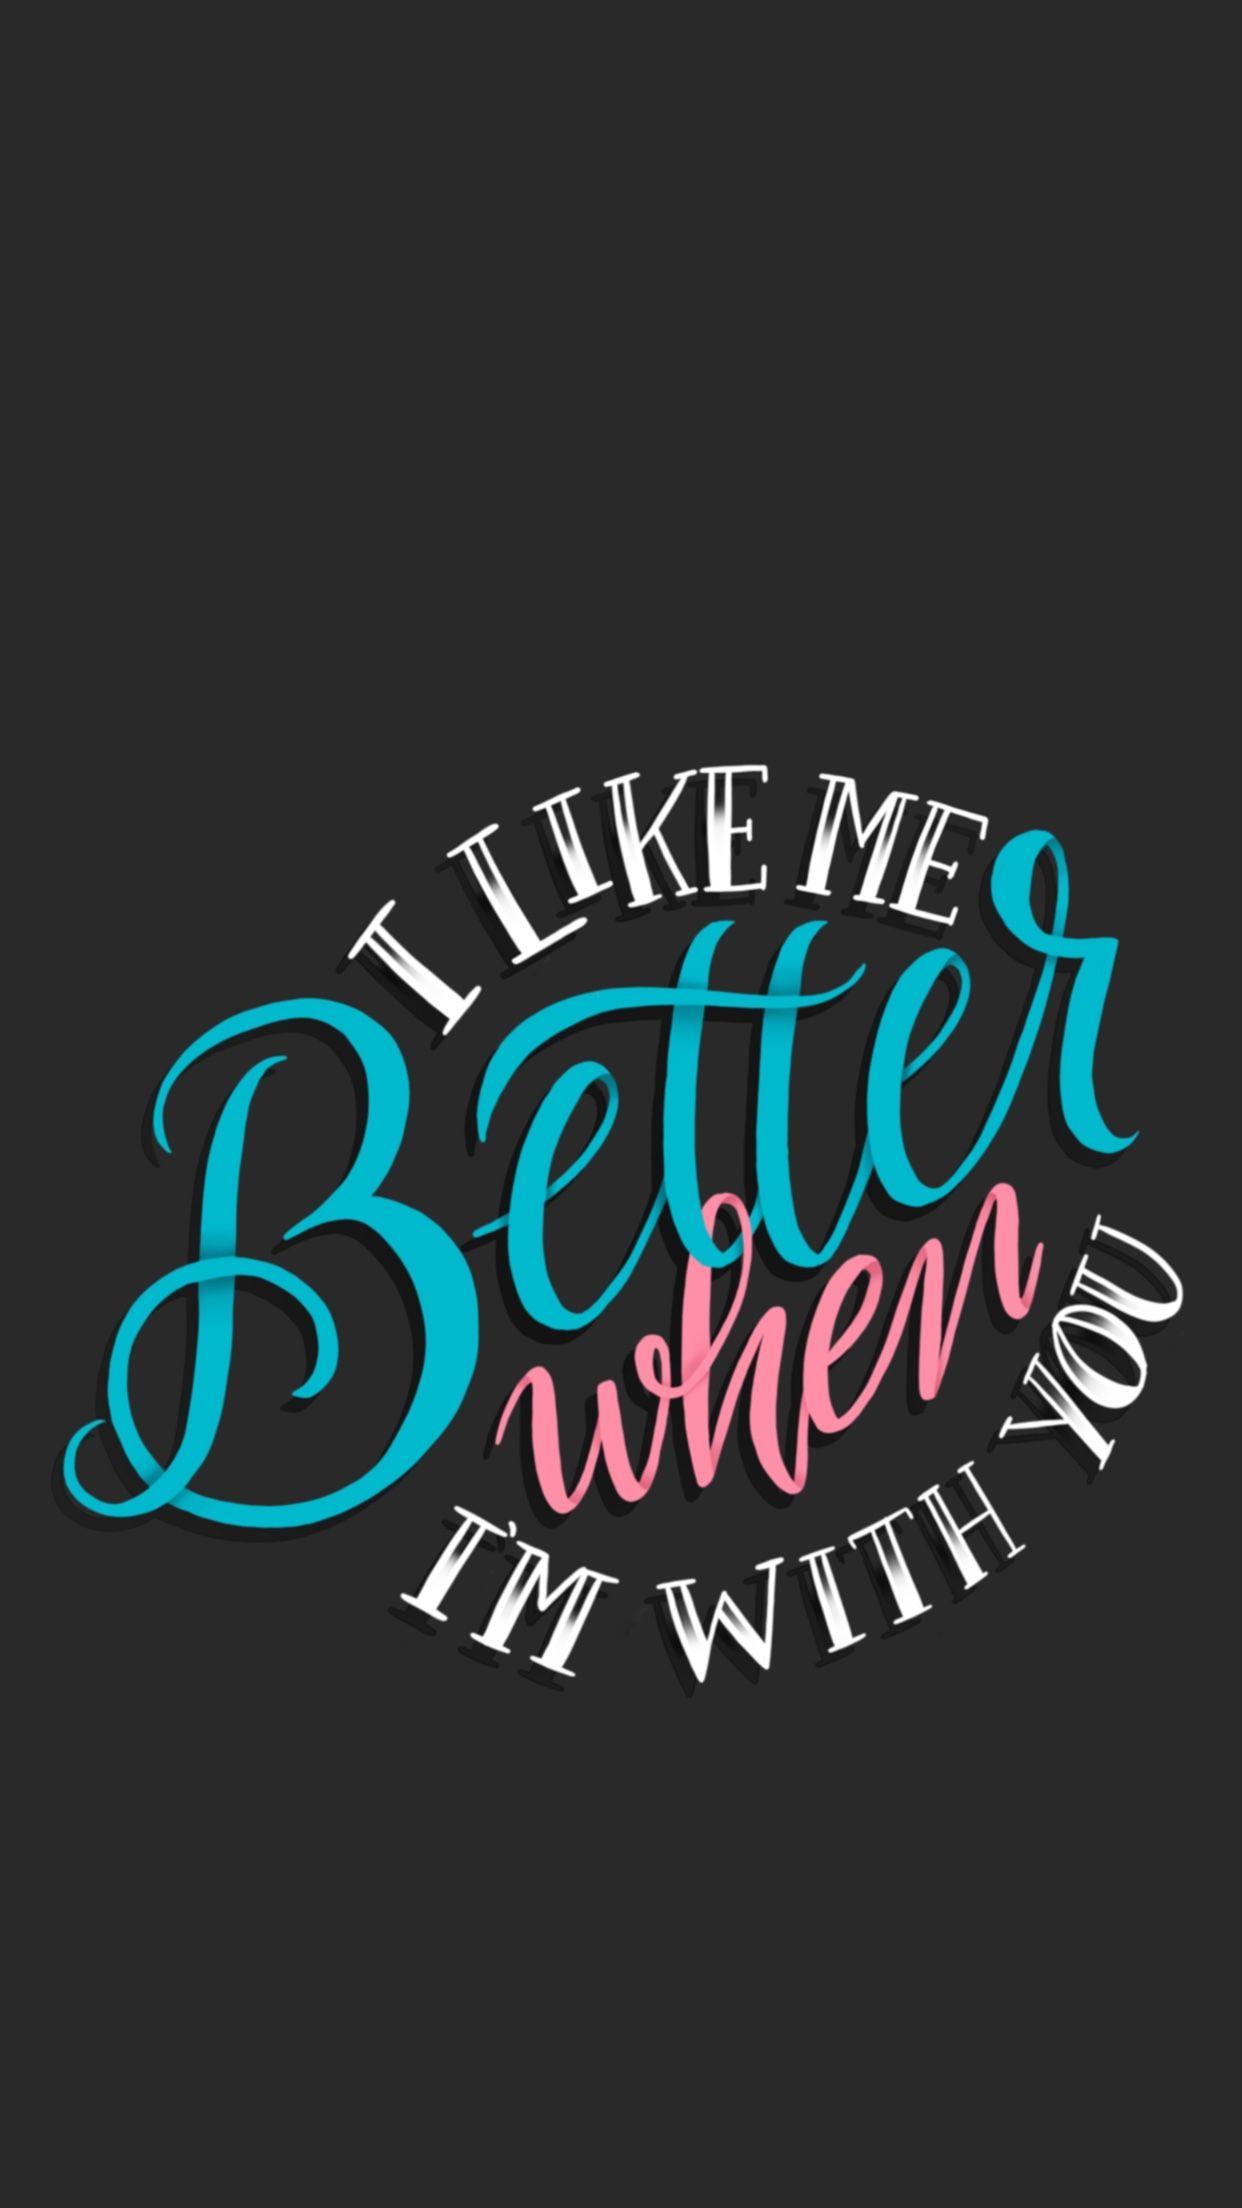 I Like Me Better by Lauv iPhone Wallpaper. Love